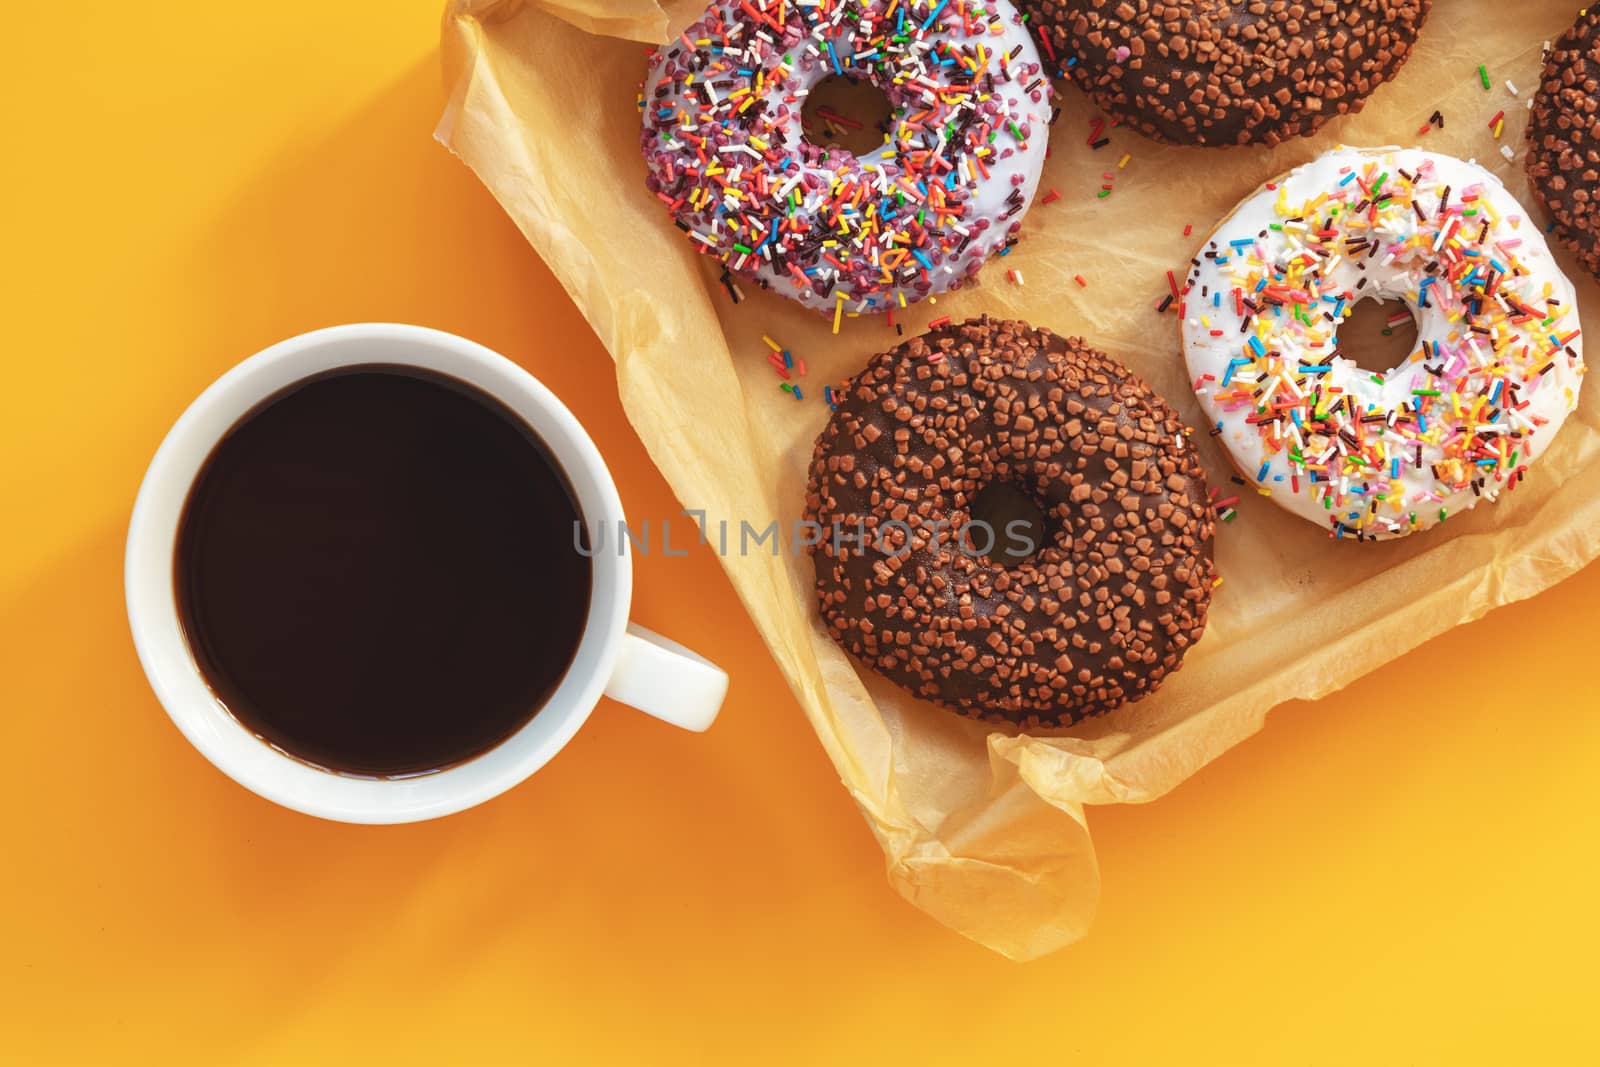 Delicious glazed donuts in box and cup of coffee on yellow surface. Flat lay minimalist food art background. Top view.